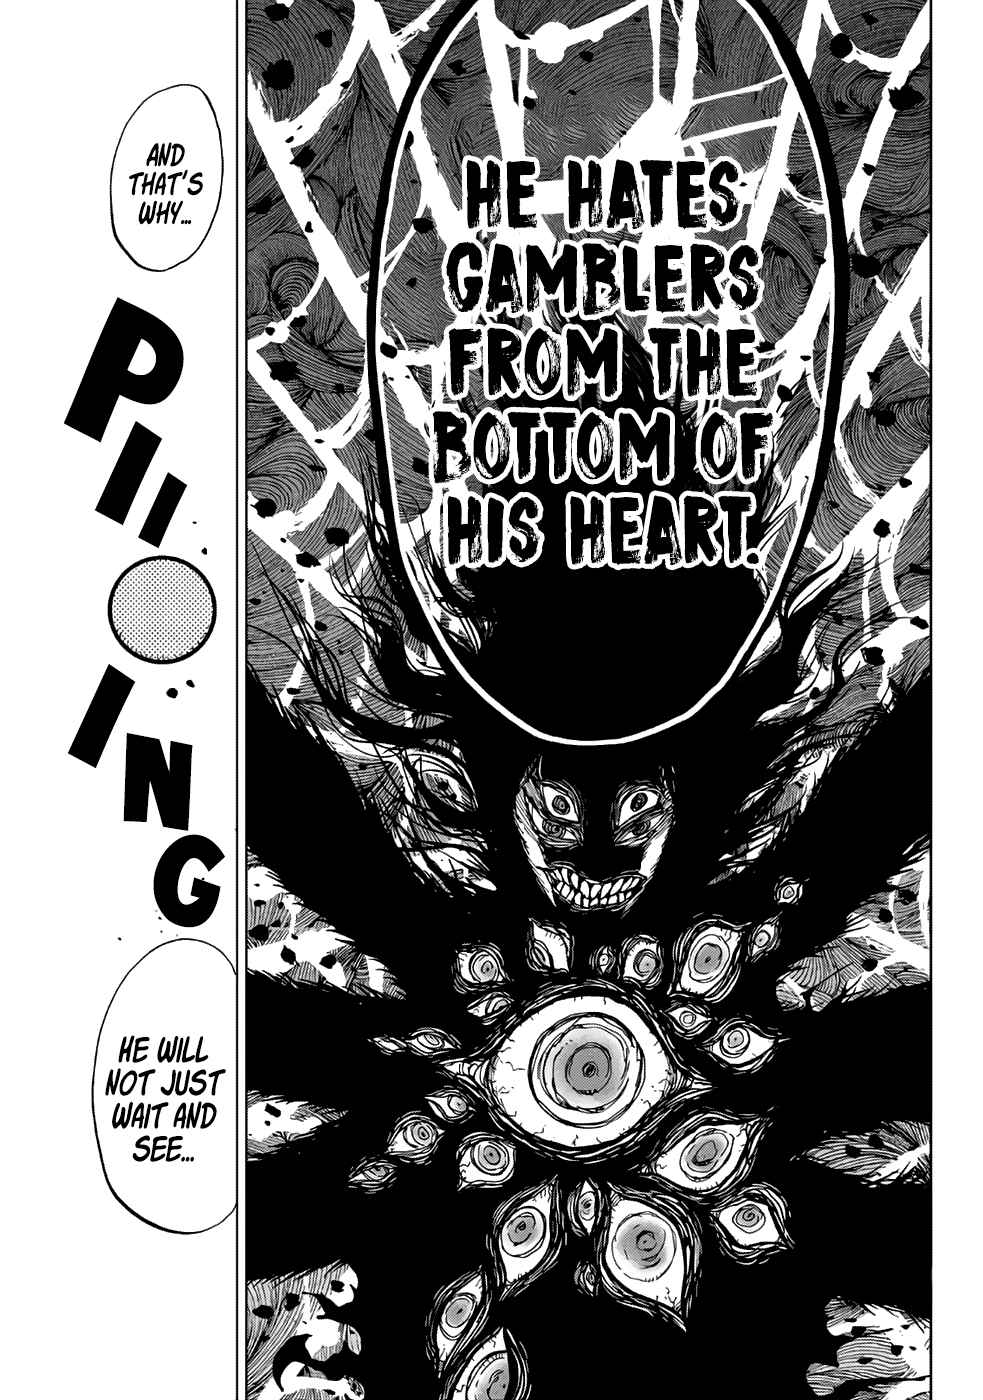 Gambler's Parade Ch. 7 From The Bottom of His Heart, He Wants to Crush